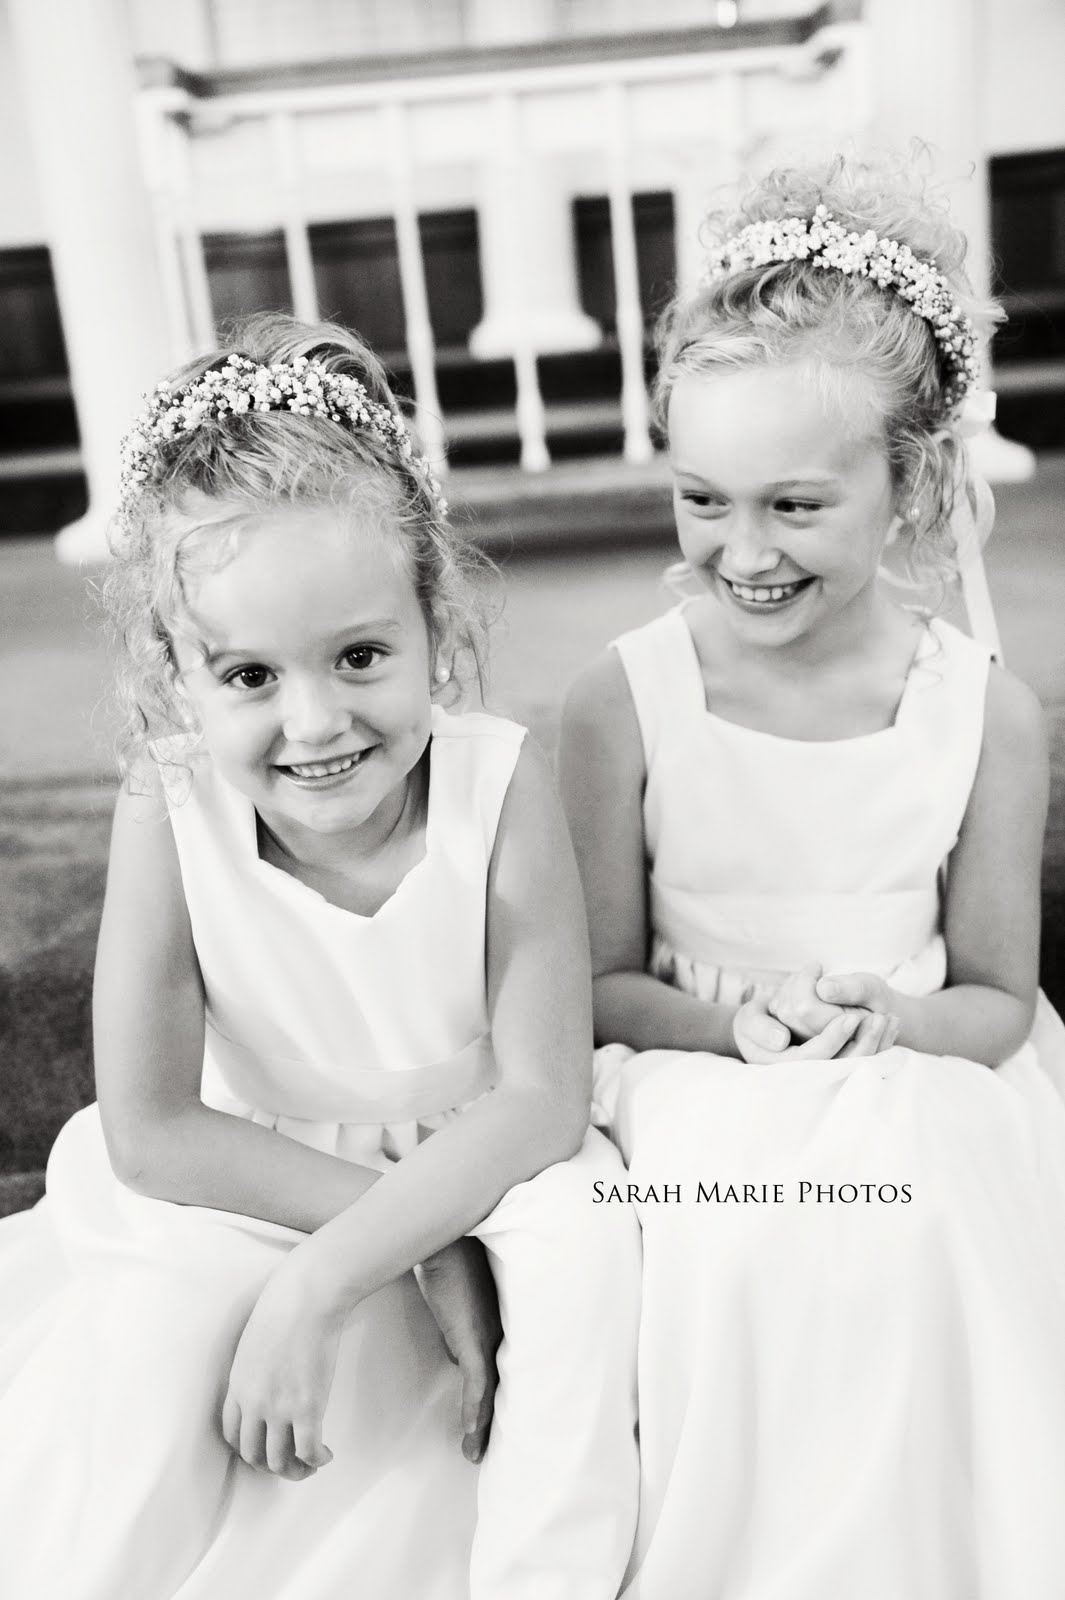 Sarah Marie Photos: Pate and Mary Katherine's forever...